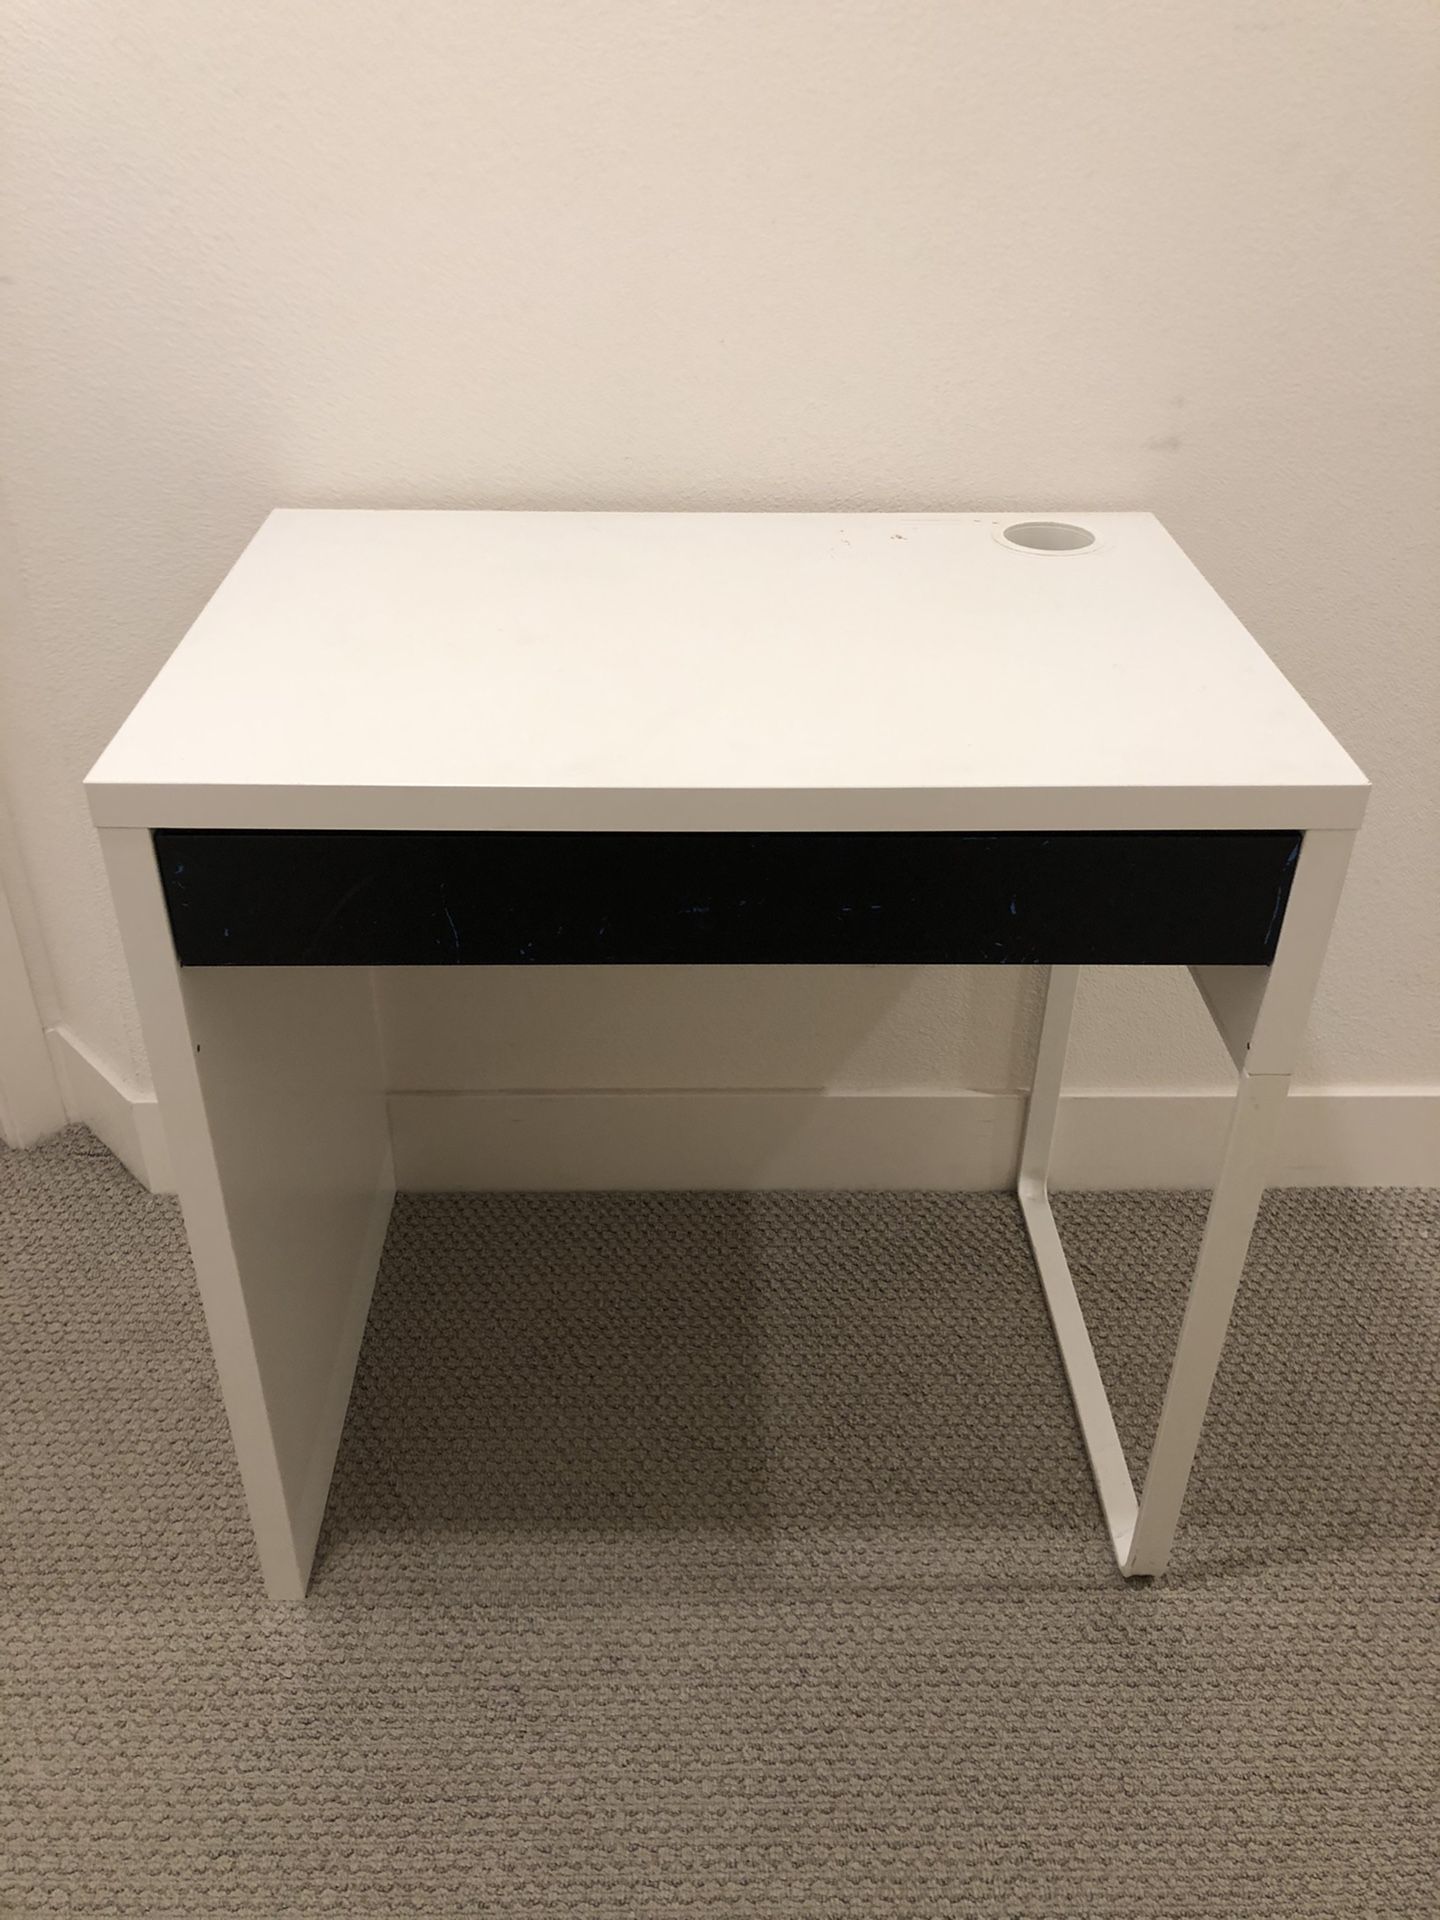 IKEA MICKE DESK WITH DRAWER